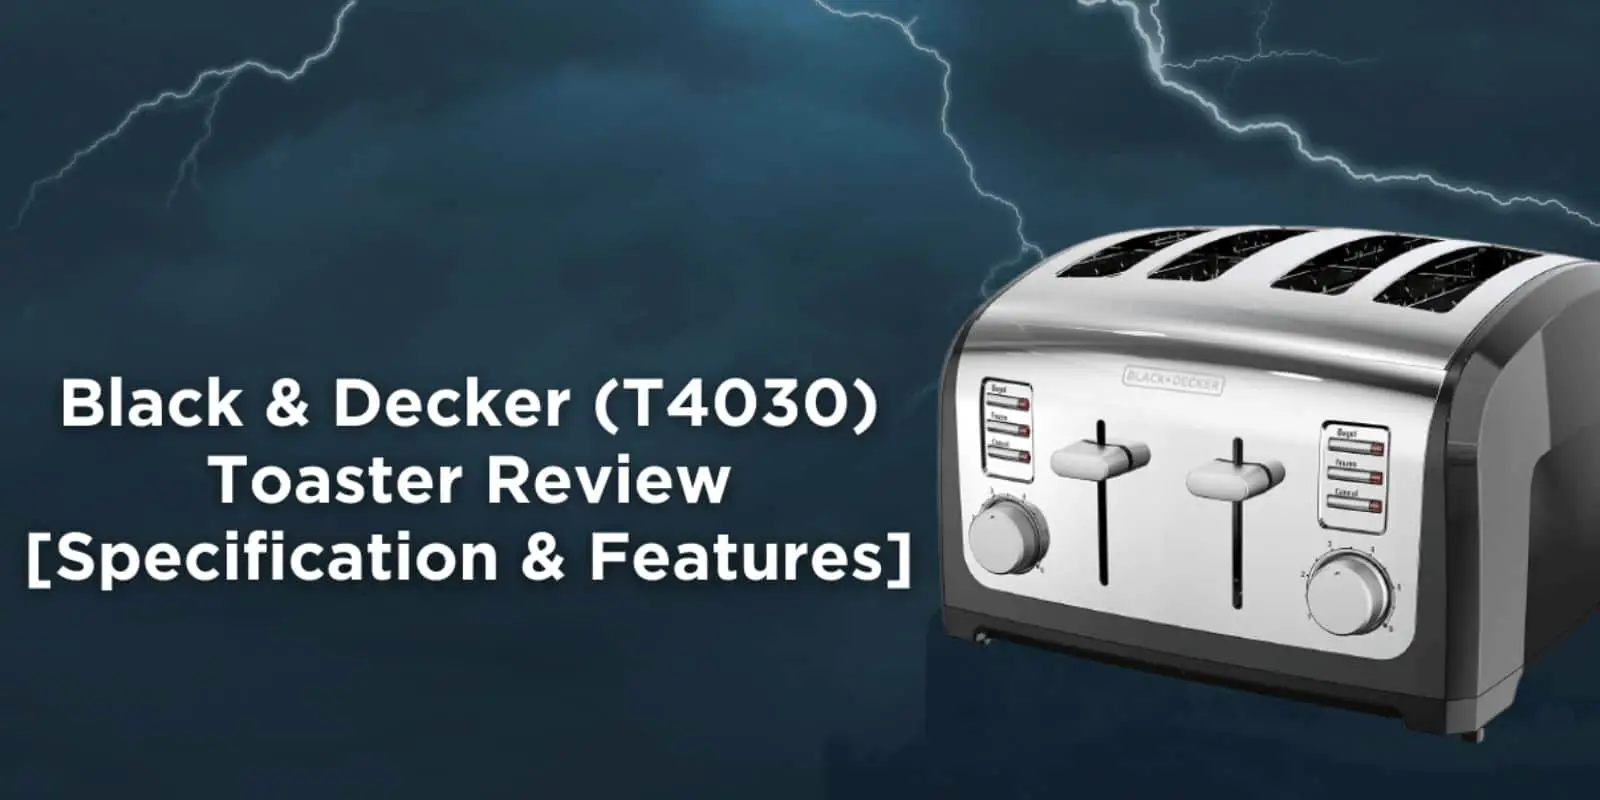 Black & Decker (T4030) Toaster Review | Features, Pros & Cons